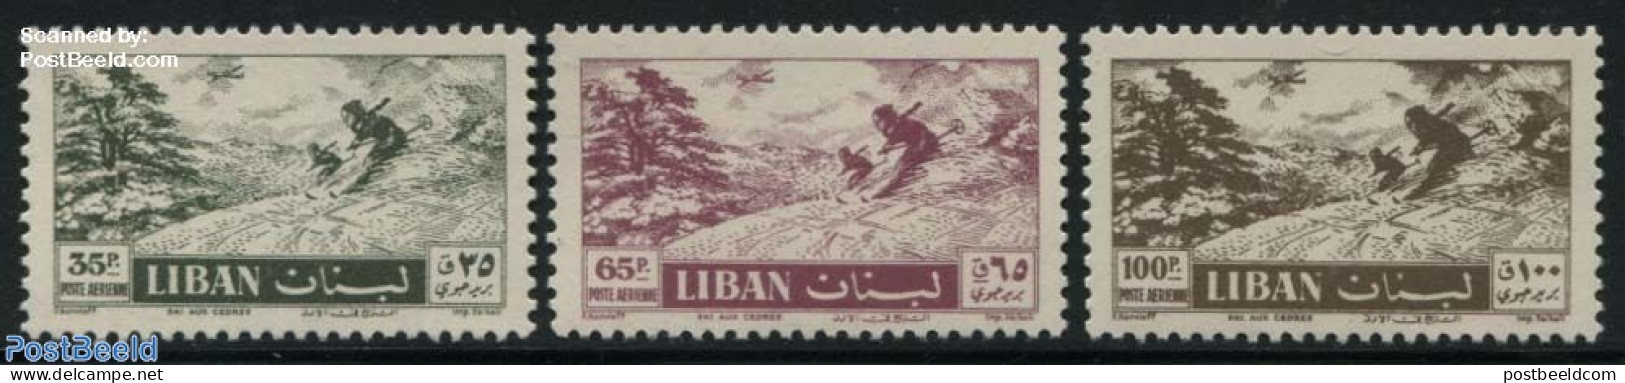 Lebanon 1957 Definitives, Skiing 3v, Mint NH, Nature - Sport - Trees & Forests - Skiing - Rotary, Club Leones